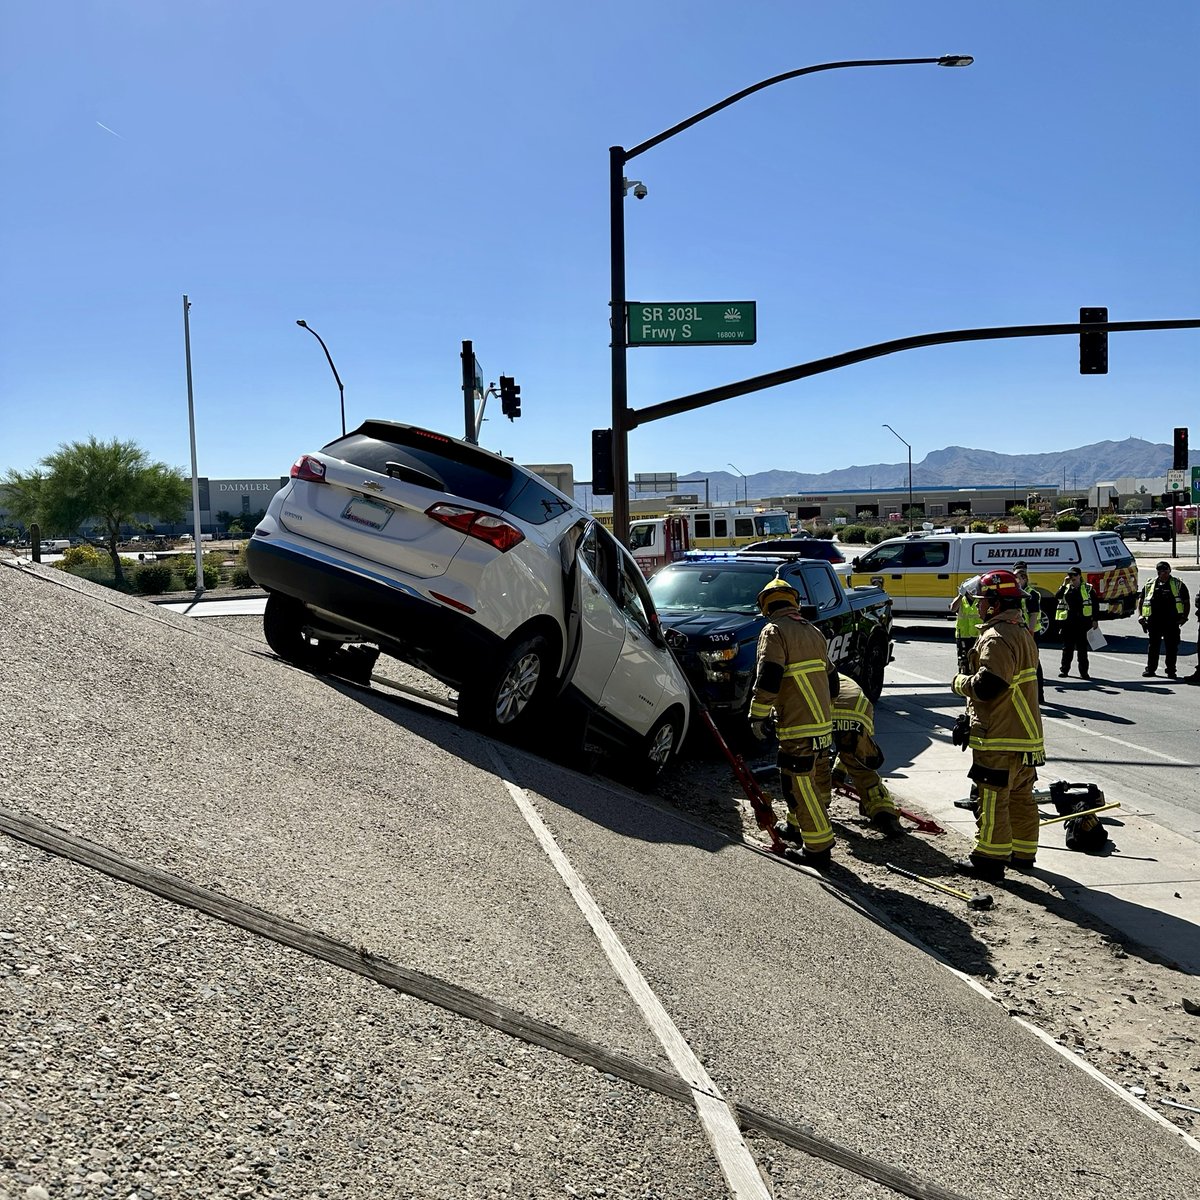 Thanks for the assist @Goodyearpolice!
Yesterday, #GoodyearFire was dispatched to a vehicle crash involving two cars. L184 did a great job with a difficult extrication. One patient was transported to the hospital with minor injuries.   
Please, #DriveSafe

#CityofGoodyear